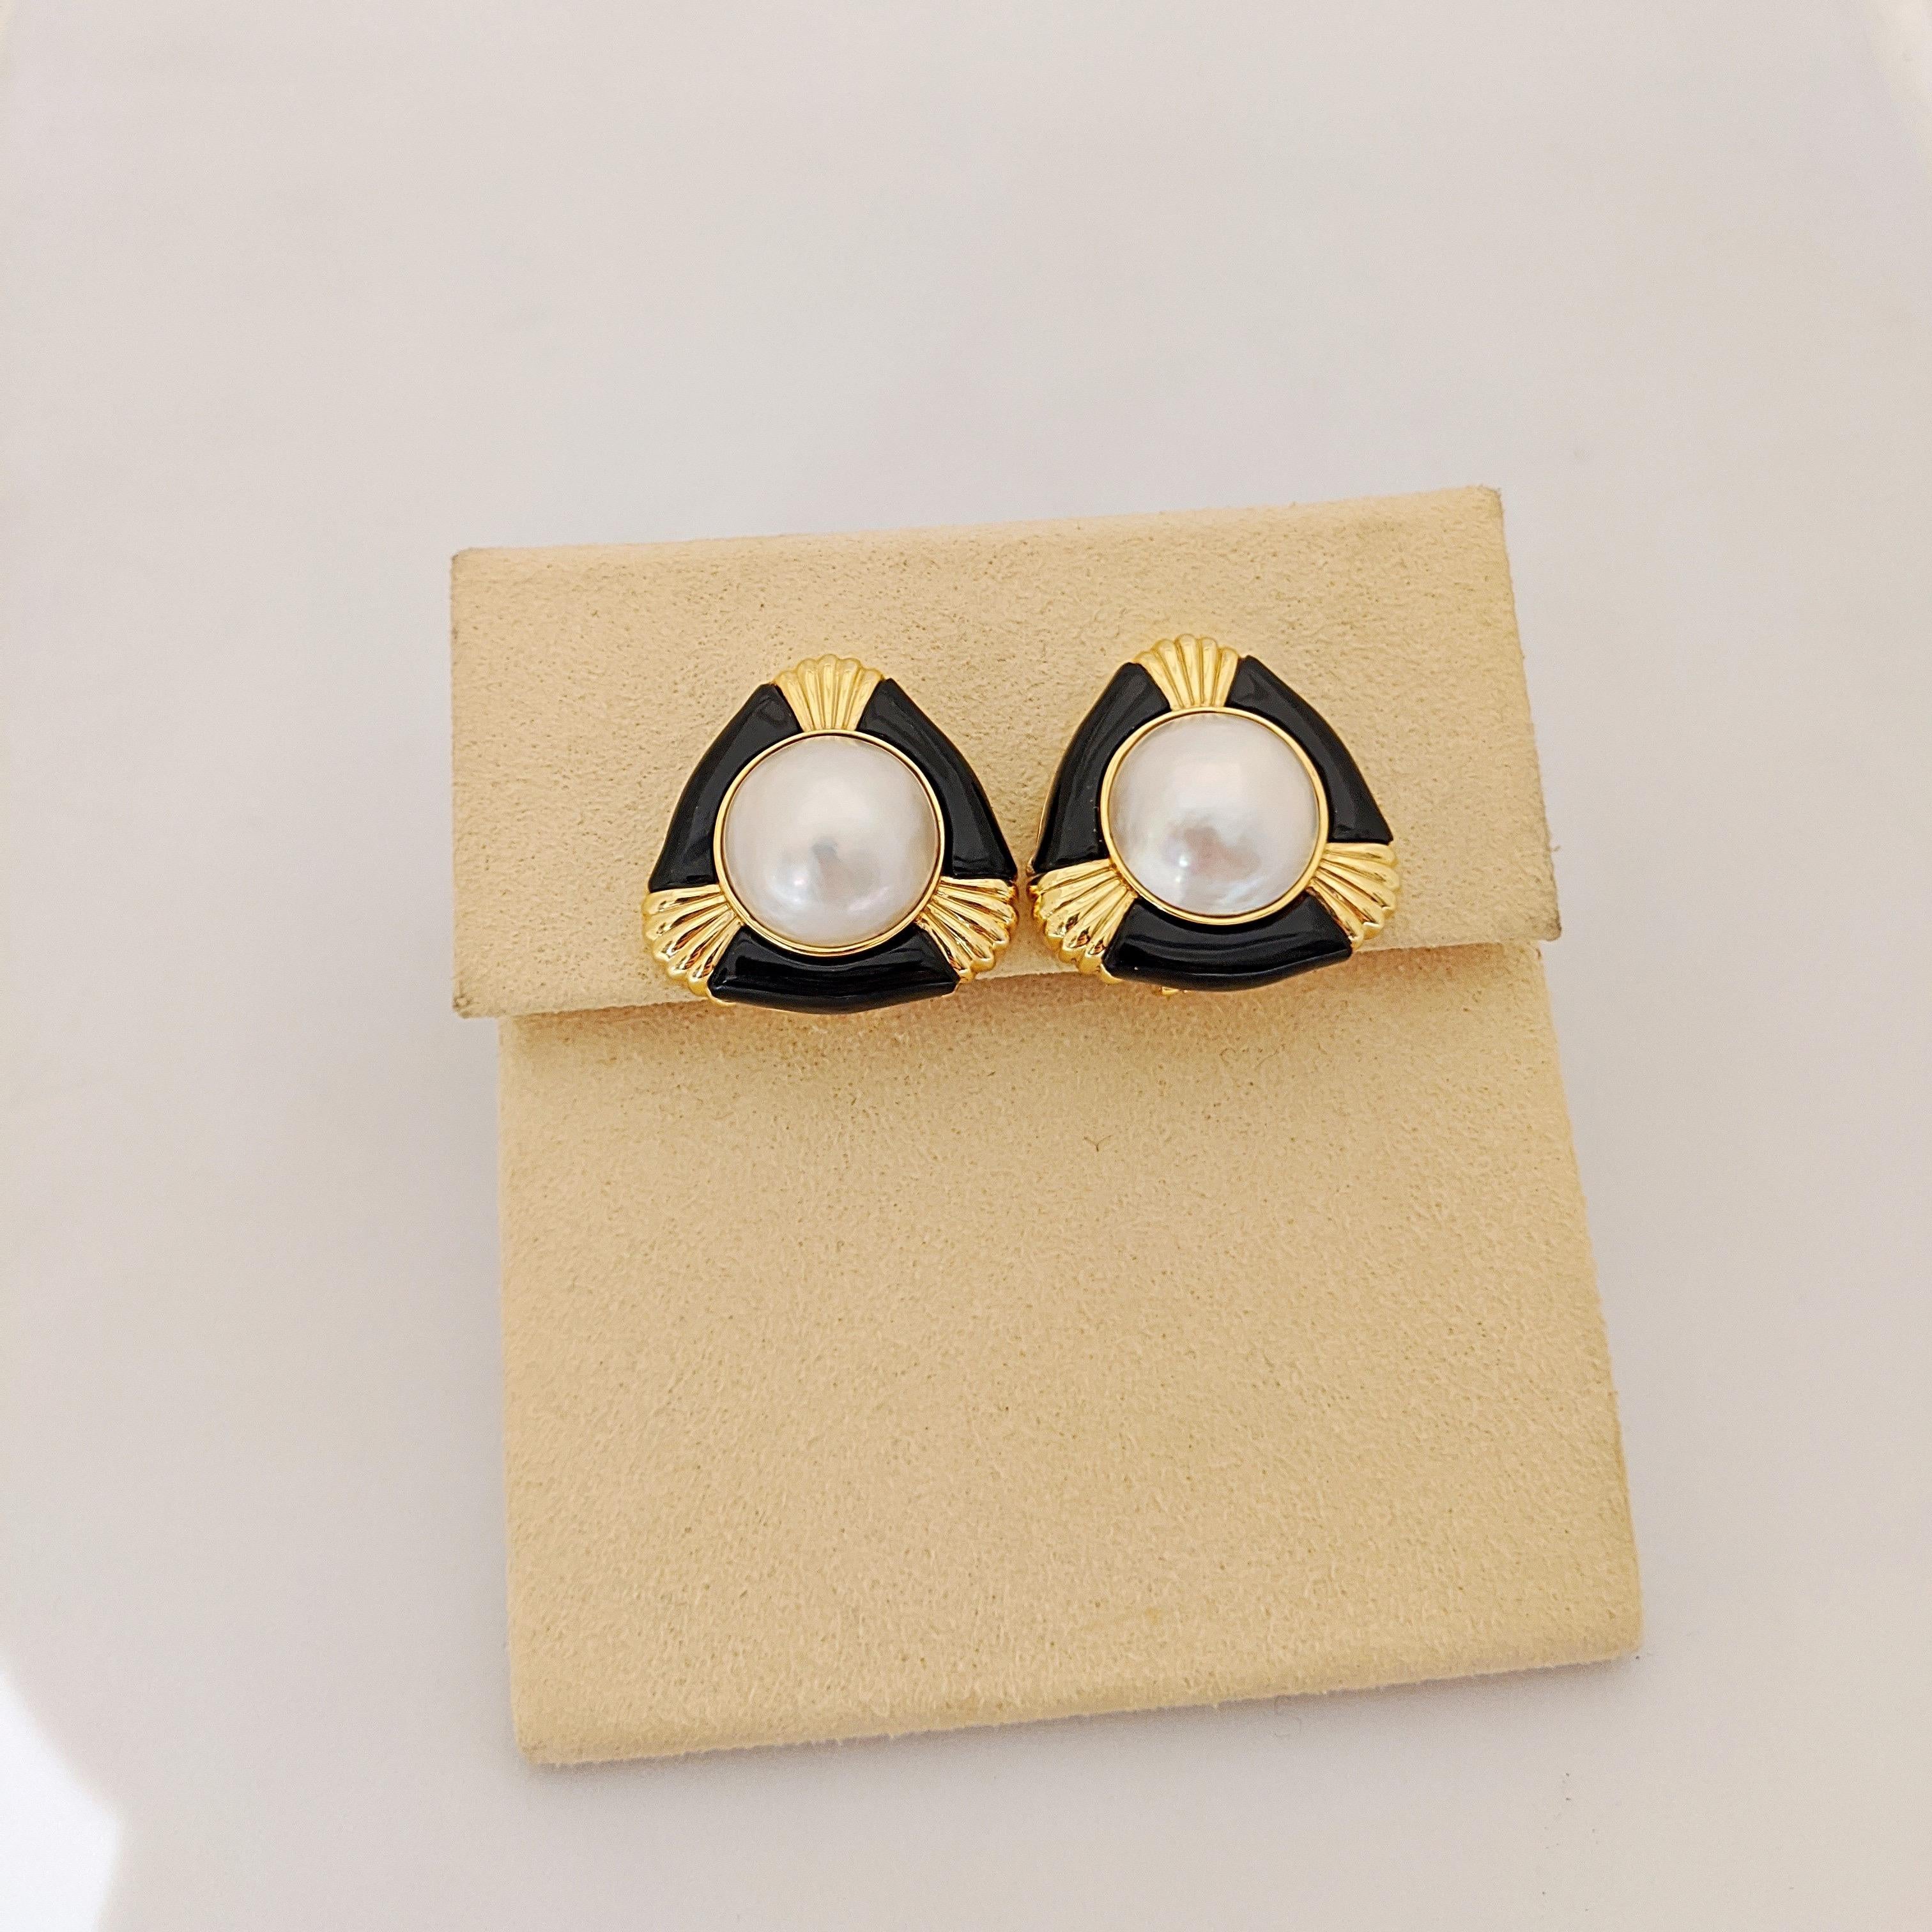 14 Karat Yellow Gold Earrings with Mabe Pearl and Black Onyx 1